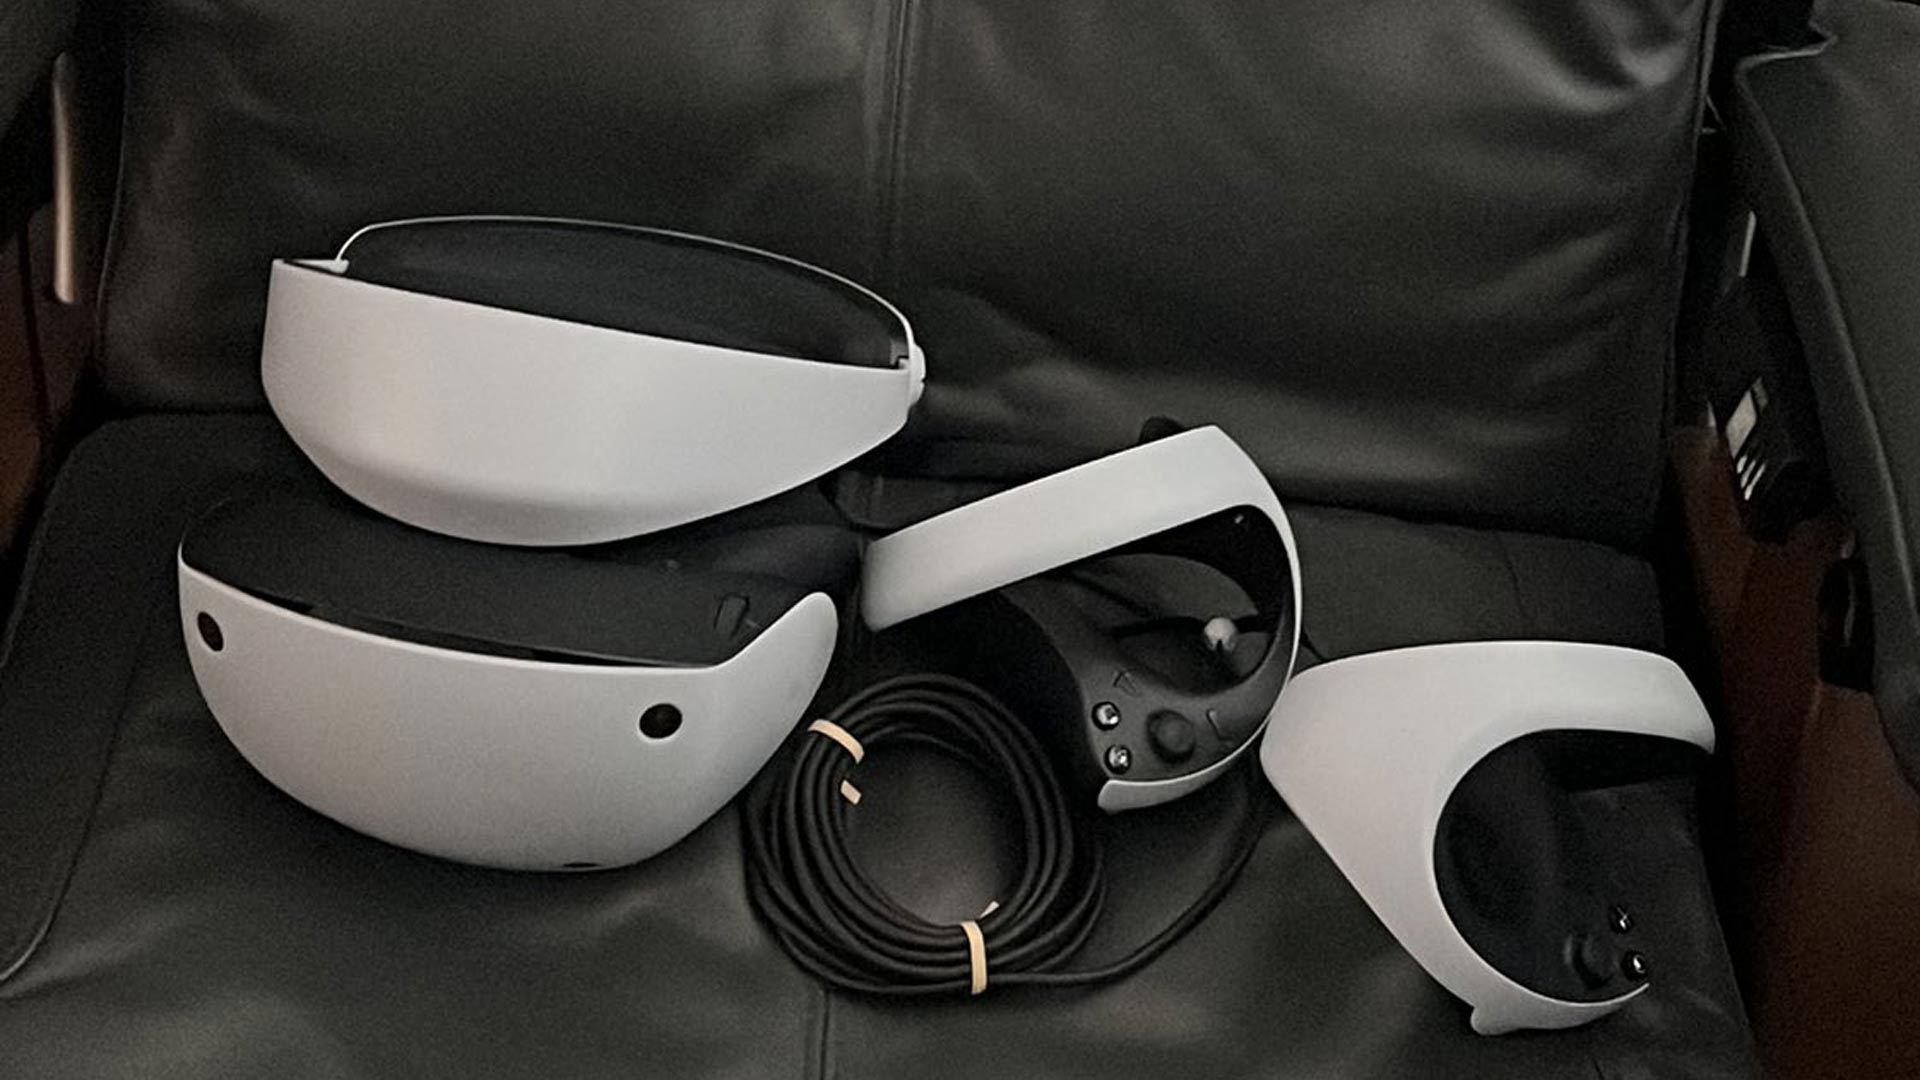 PSVR 2 Spotted in Developer Photo, Studio Claims Fakery – Road to VR